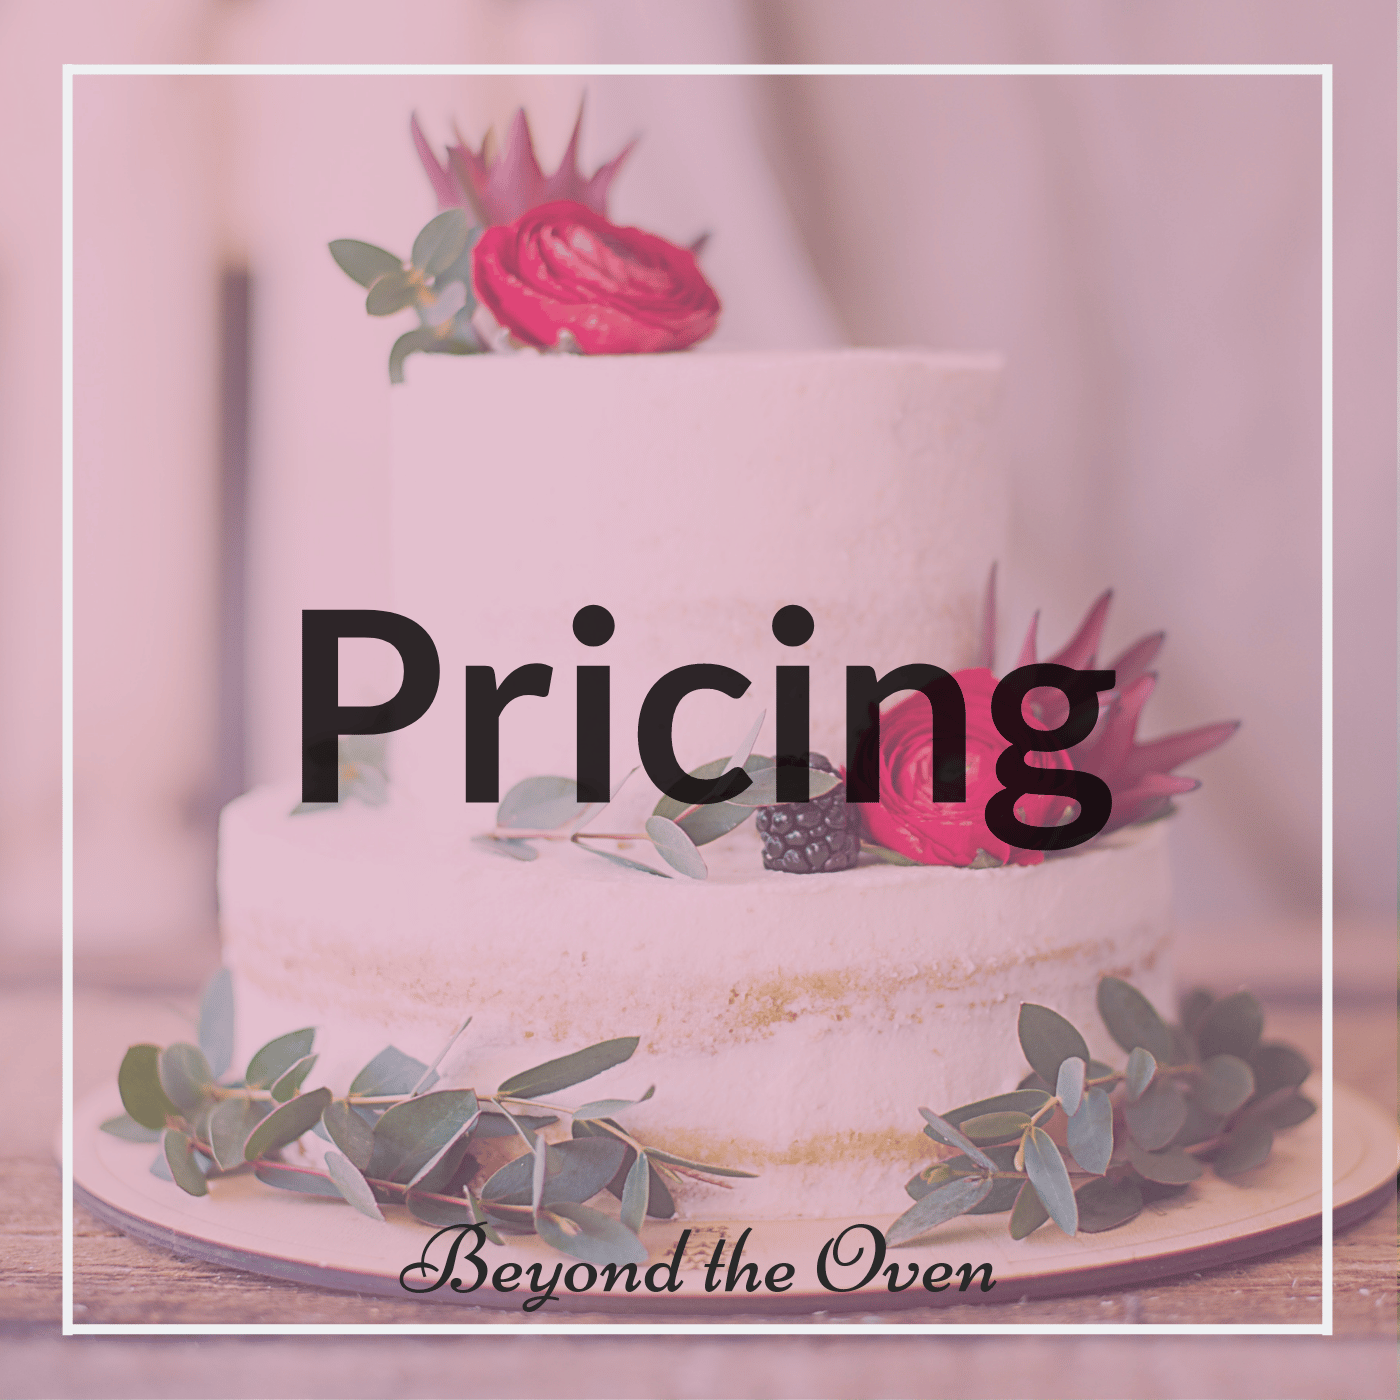 When researching how to start a cake business from home, pricing is a ...